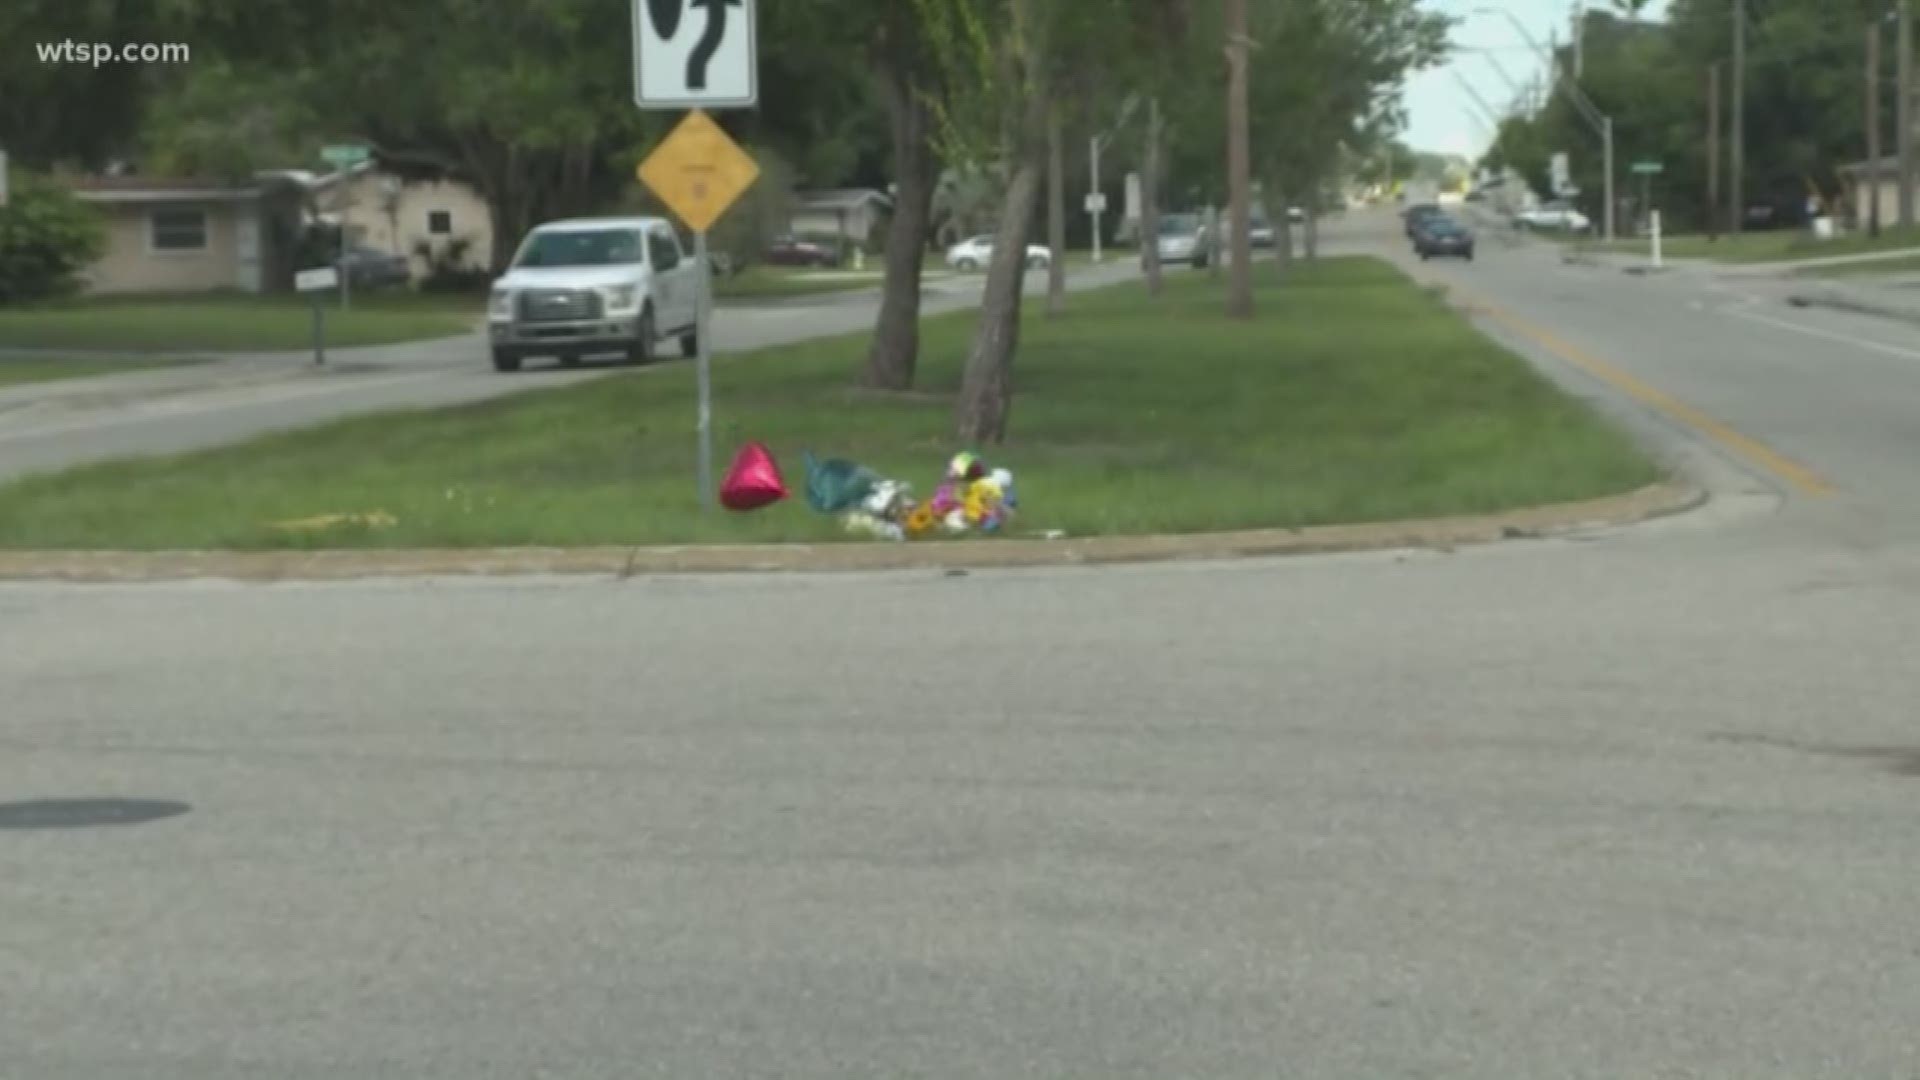 A 9-year-old boy died after he was hit by a pickup truck Monday morning.

Roman Miller, of Sarasota, was struck by a black Chevy Silverado at the intersection of Nodosa Drive and Webber Street in Sarasota Springs, according to Florida Highway Patrol.

A 25-year-old Sarasota woman was driving the pickup truck north on Nodosa Drive when she hit Miller, who was in the crosswalk. The child was driven to the hospital, where he was pronounced dead.